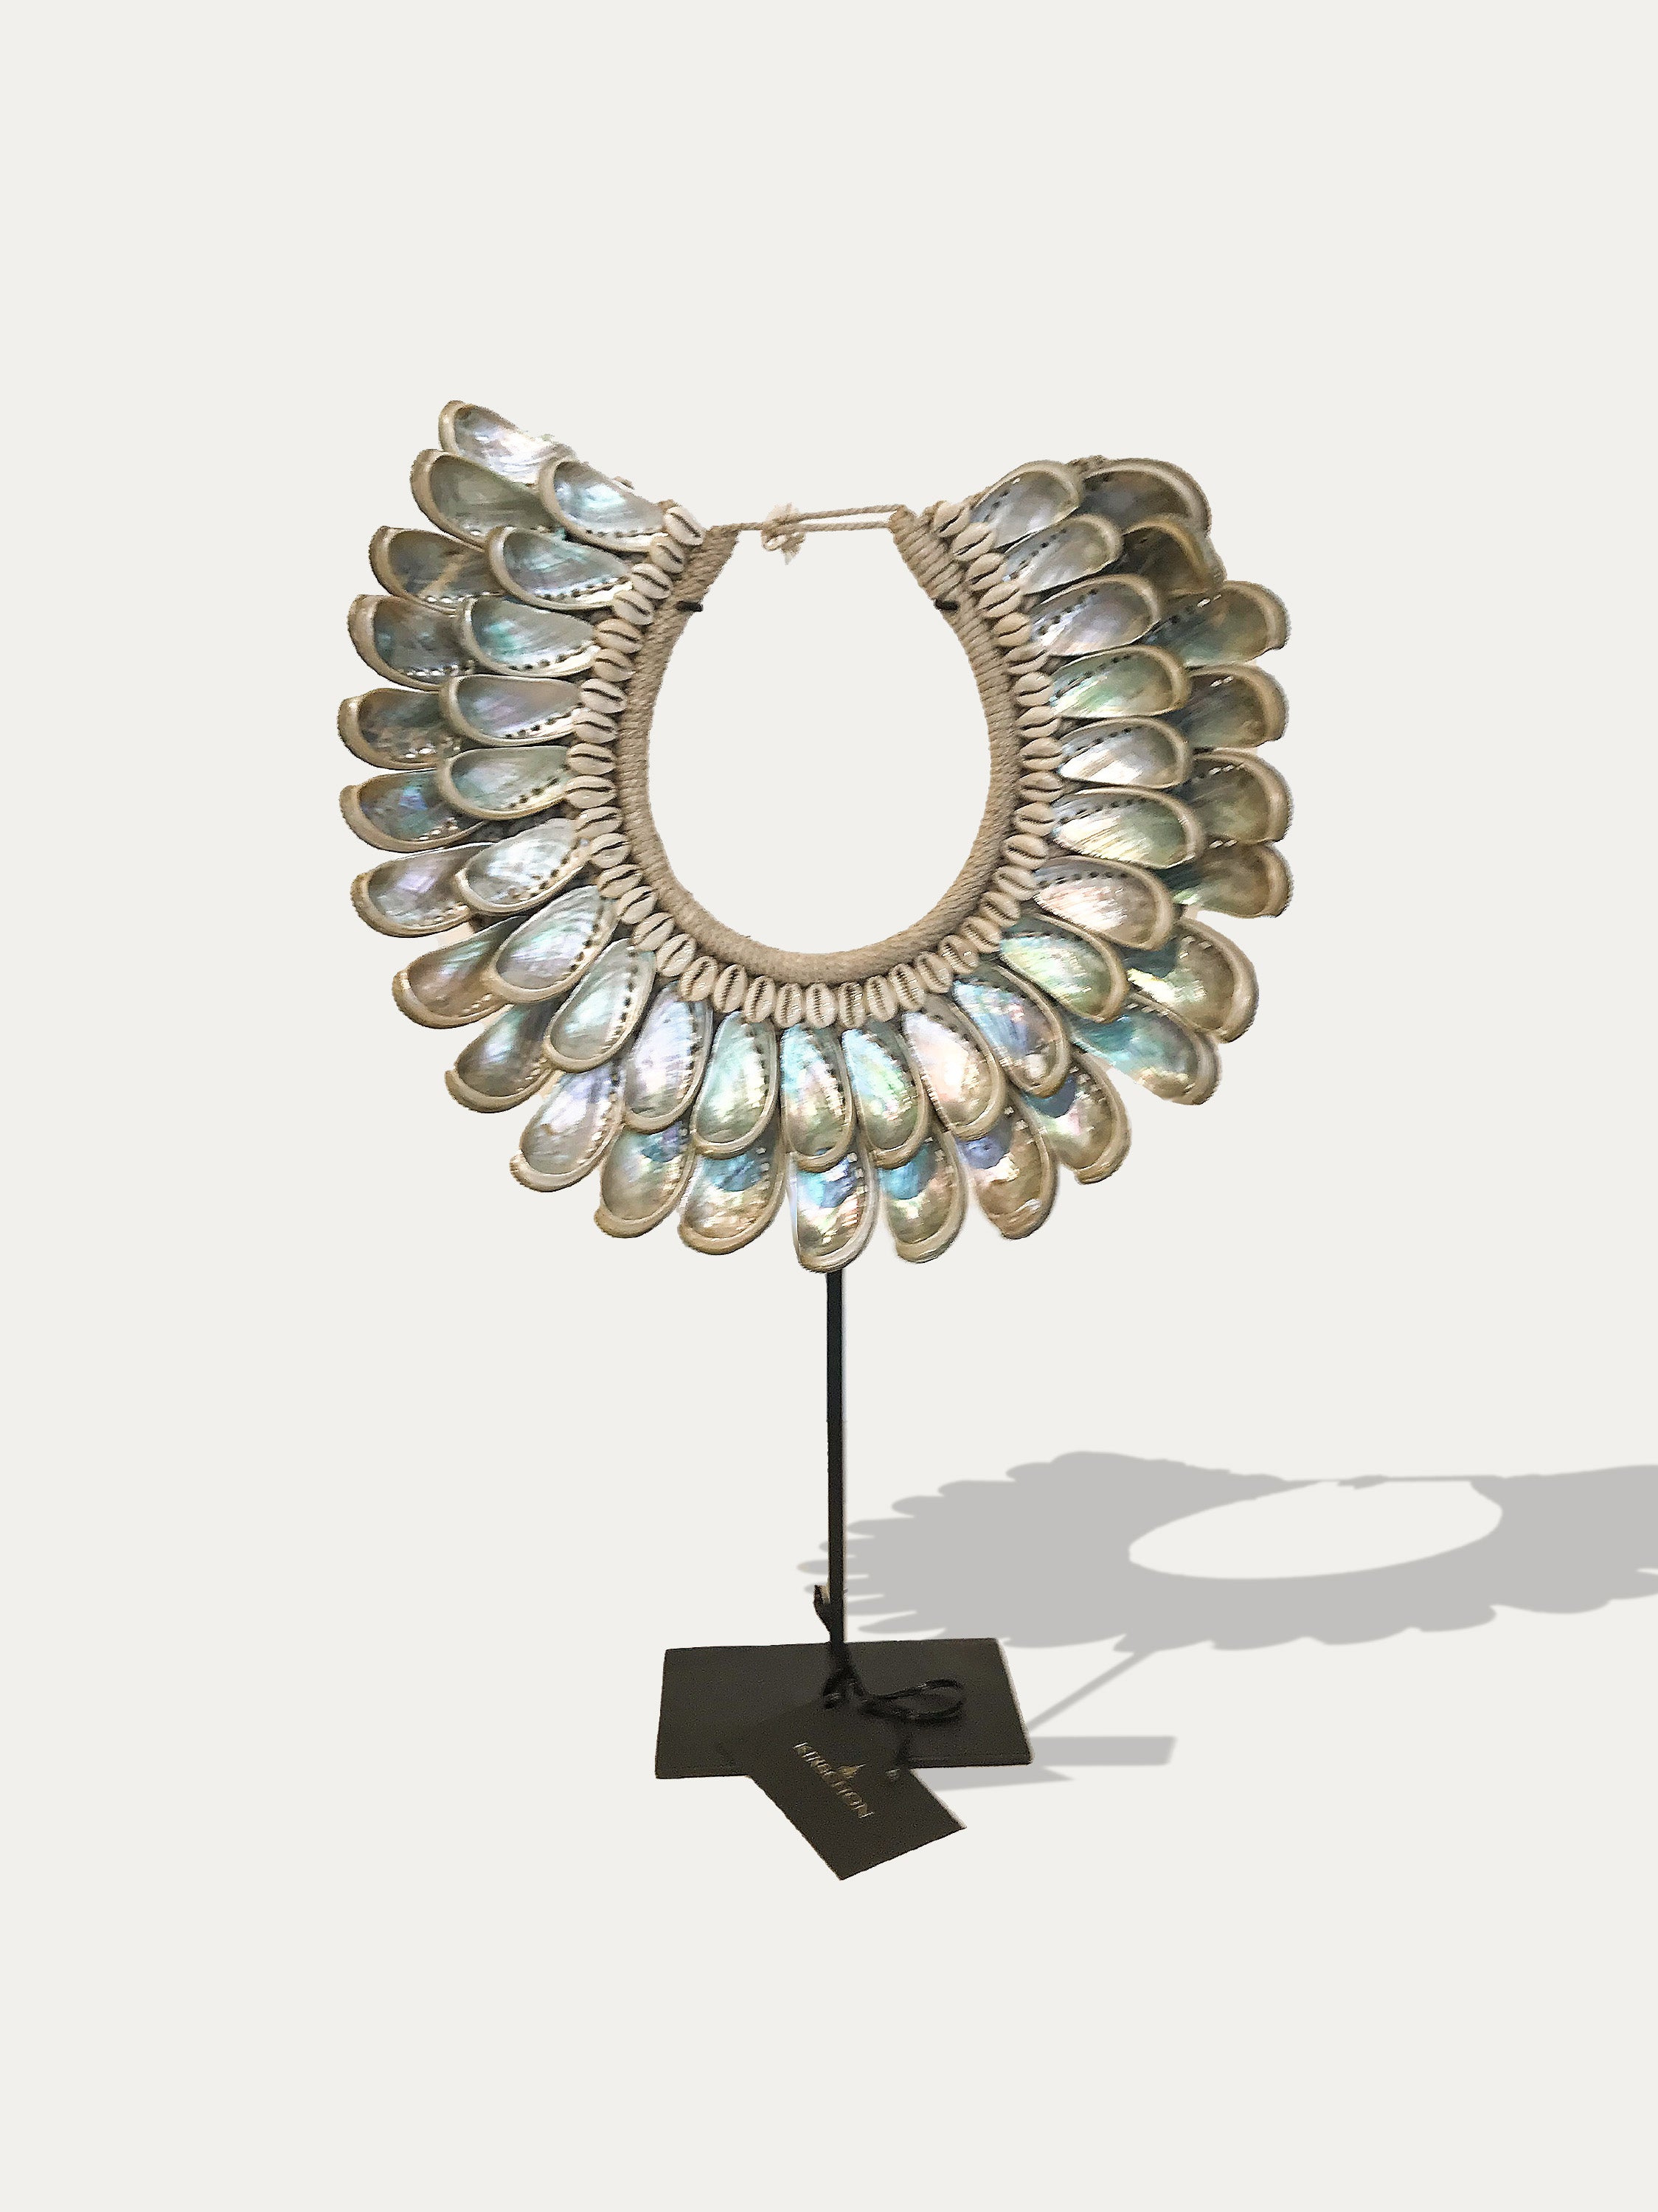 Abalone shell necklace from Papua - Asian Art from Kirschon